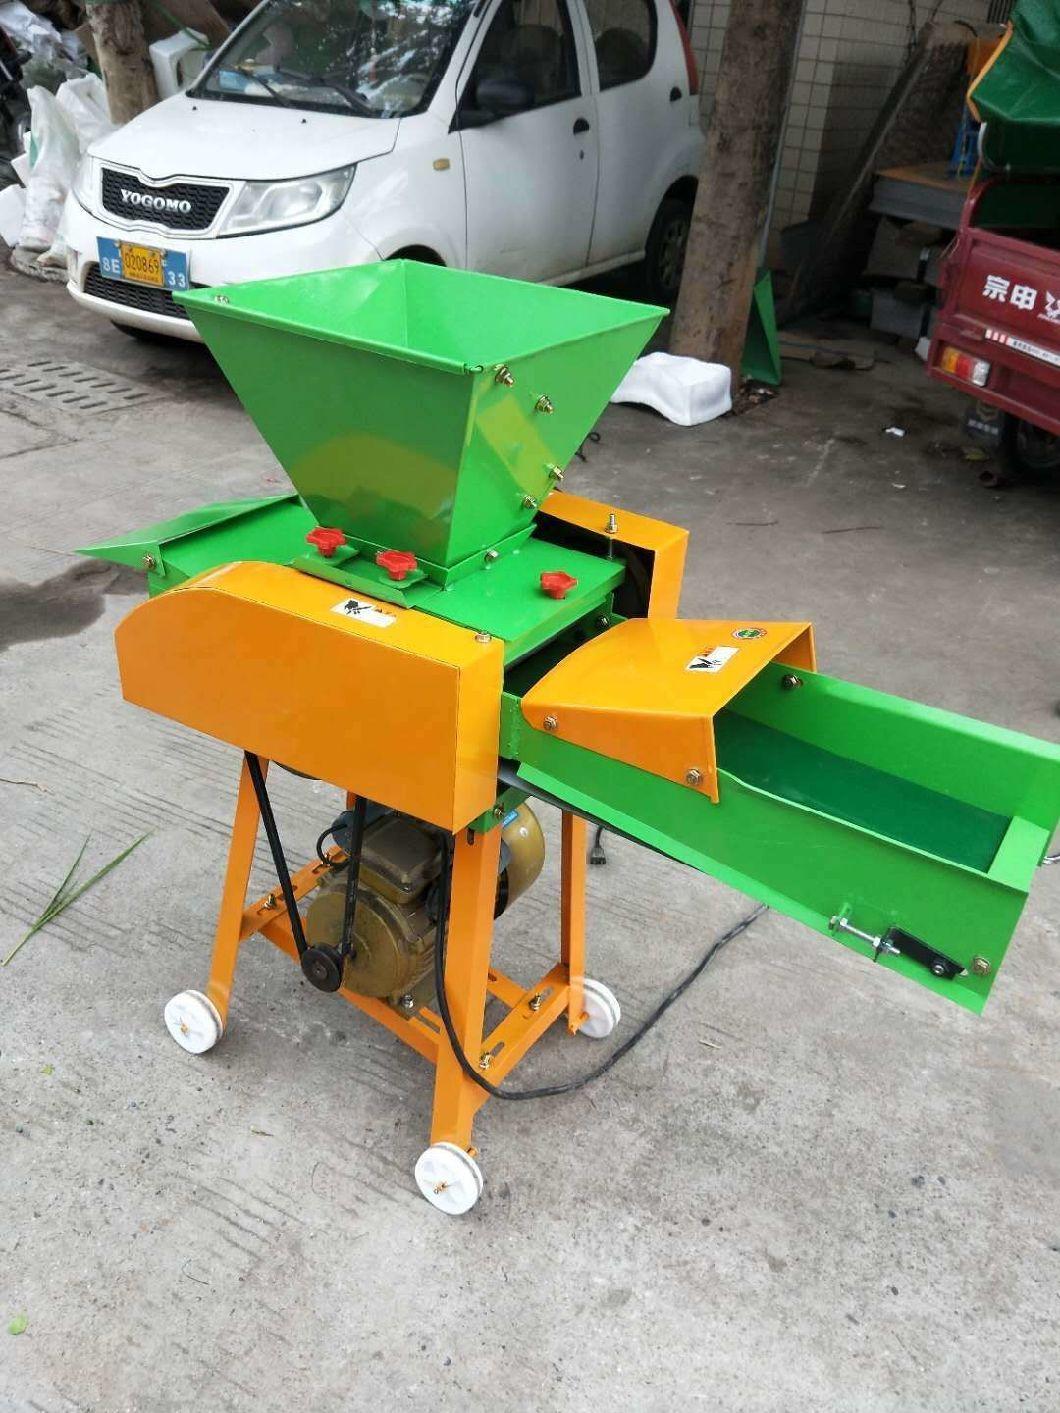 Nanfang Grinder Machinery Farm Small Hay Chopper for Animal Feed Implement Tractor Lawn Grass Mower Electric Cutter Machine